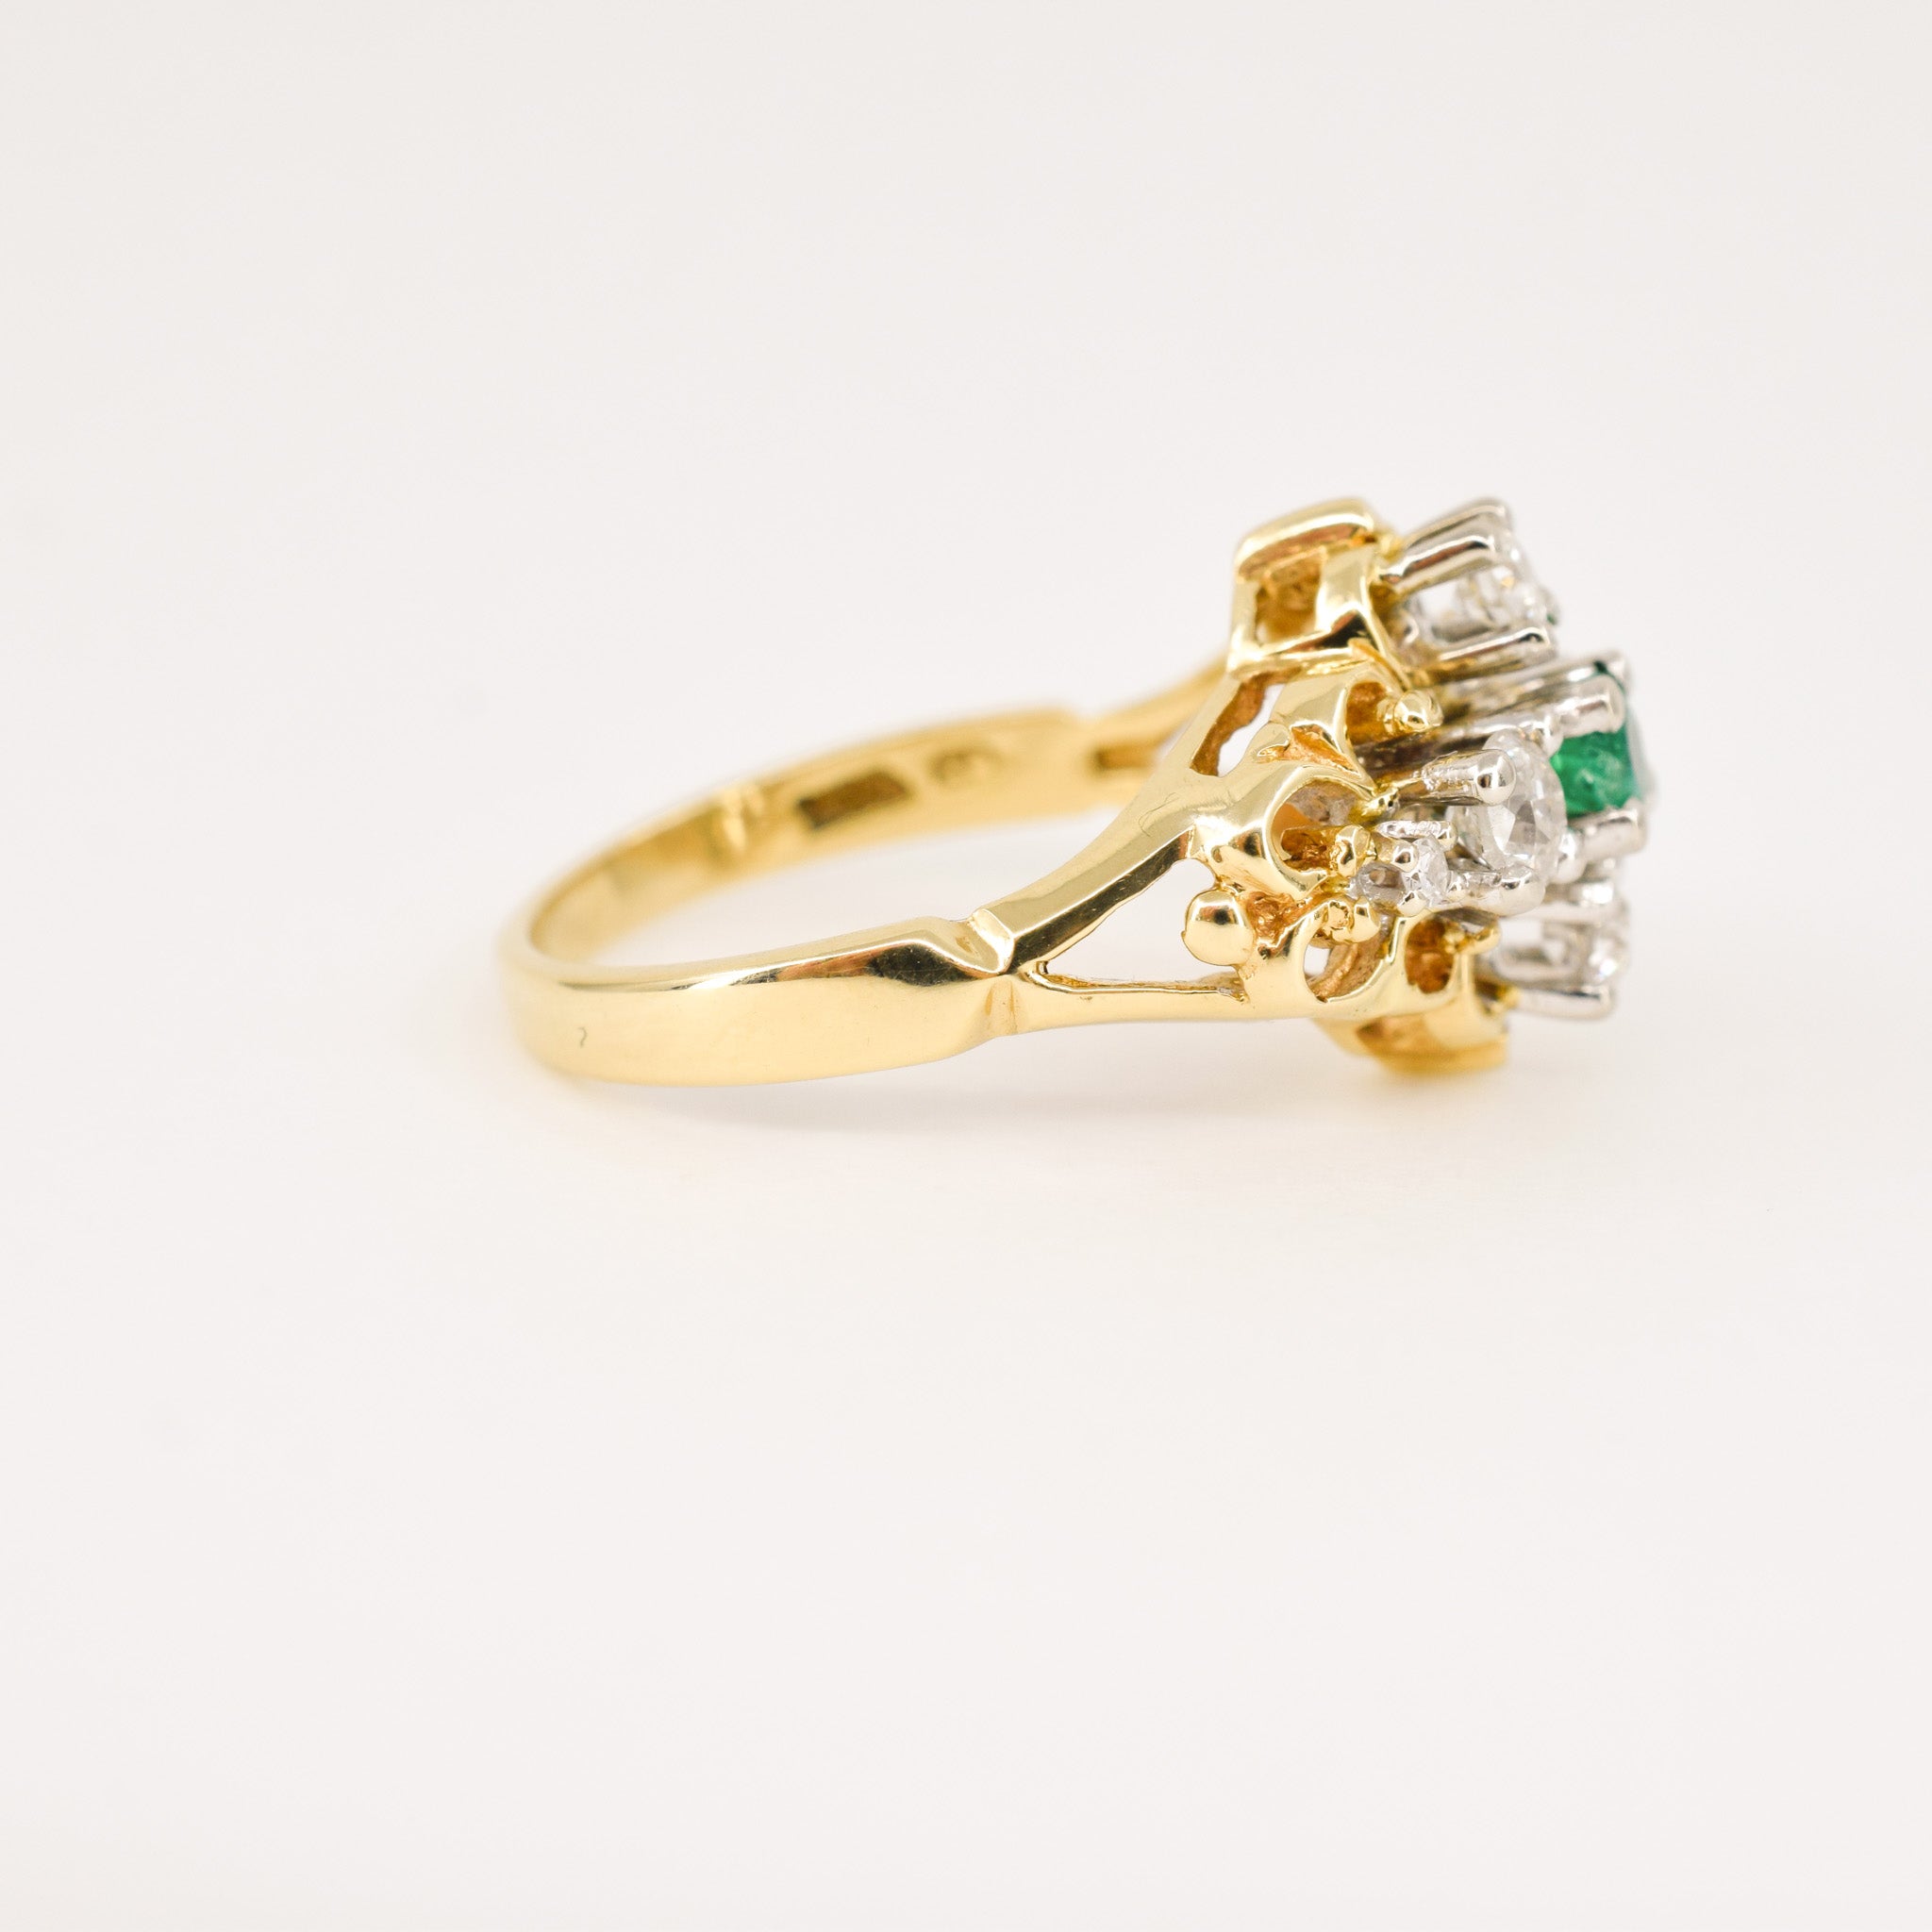 vintage birks emerald and diamond engagement ring, folklor vintage jewelry canada